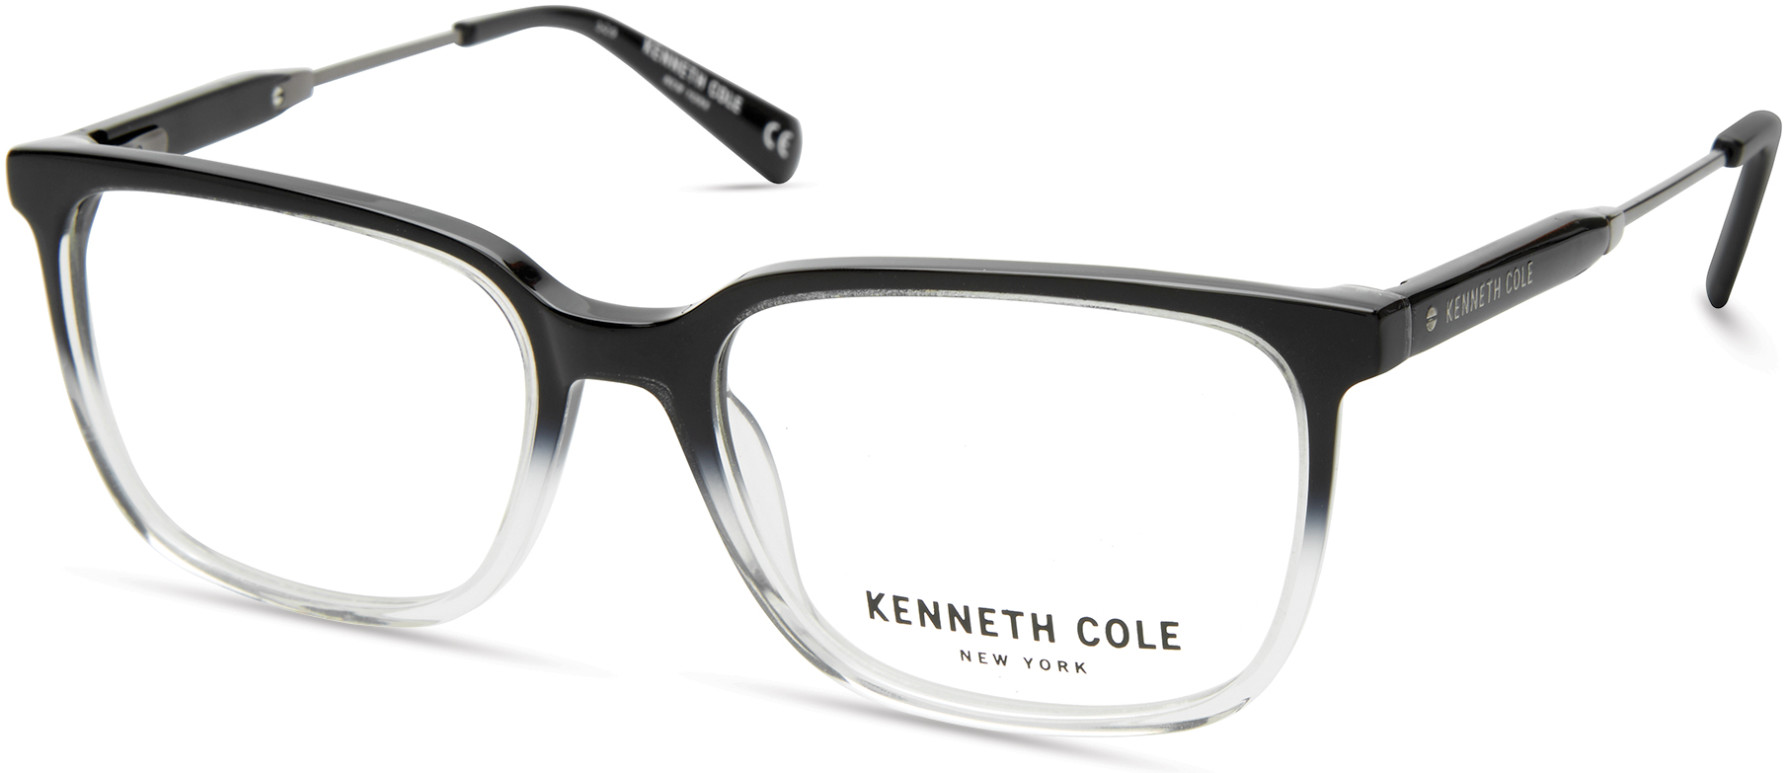 KENNETH COLE NY 0304 005